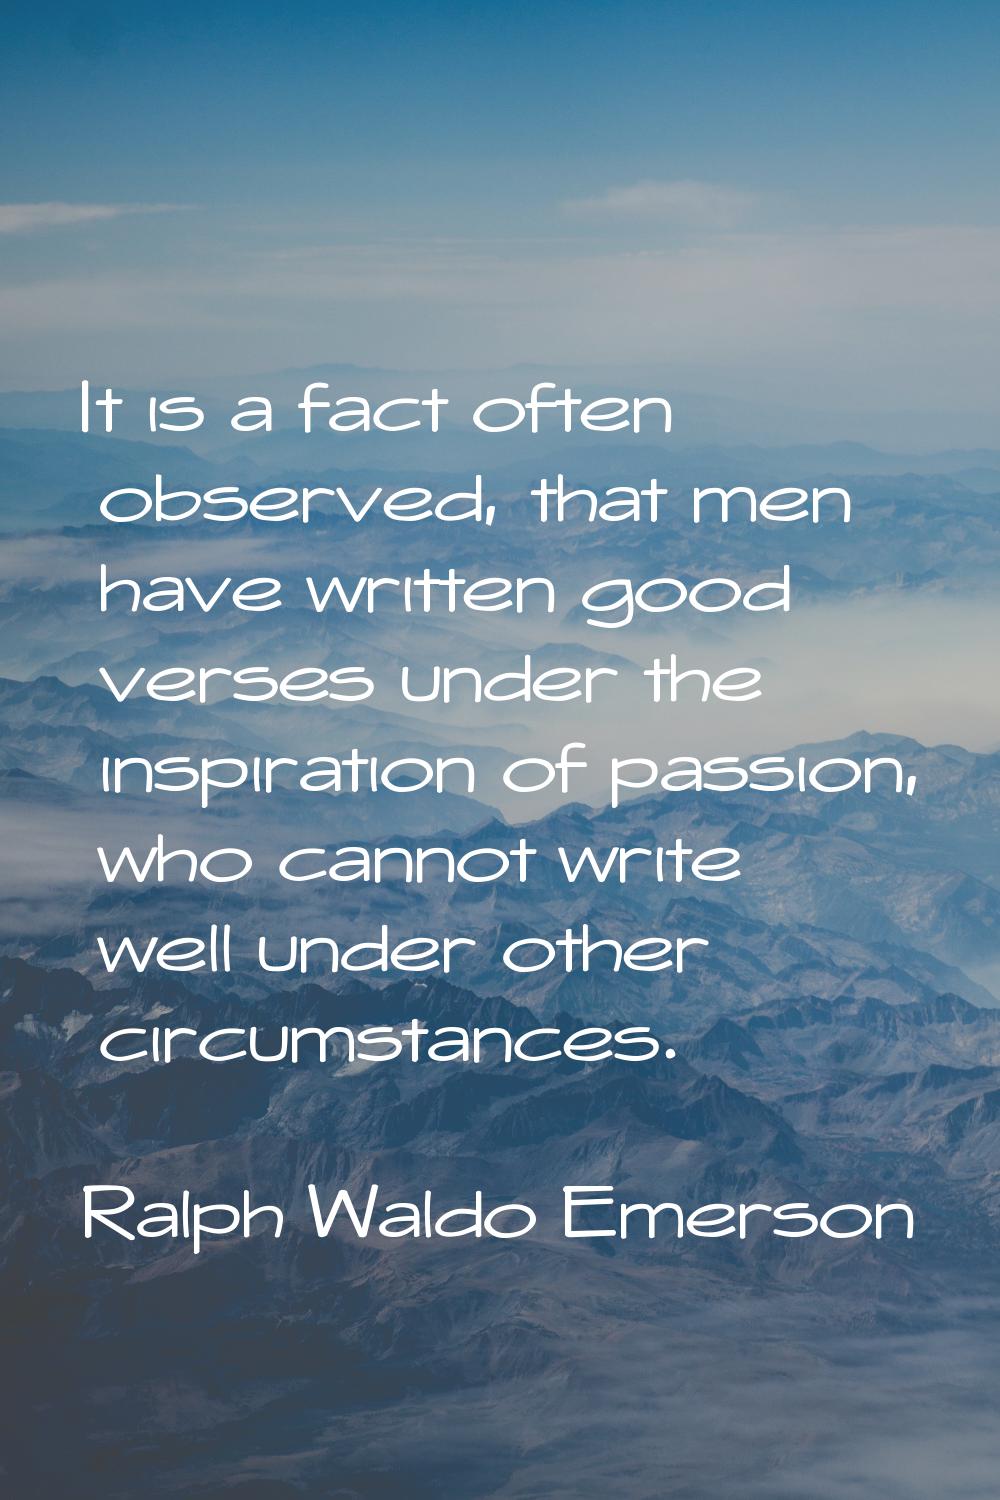 It is a fact often observed, that men have written good verses under the inspiration of passion, wh